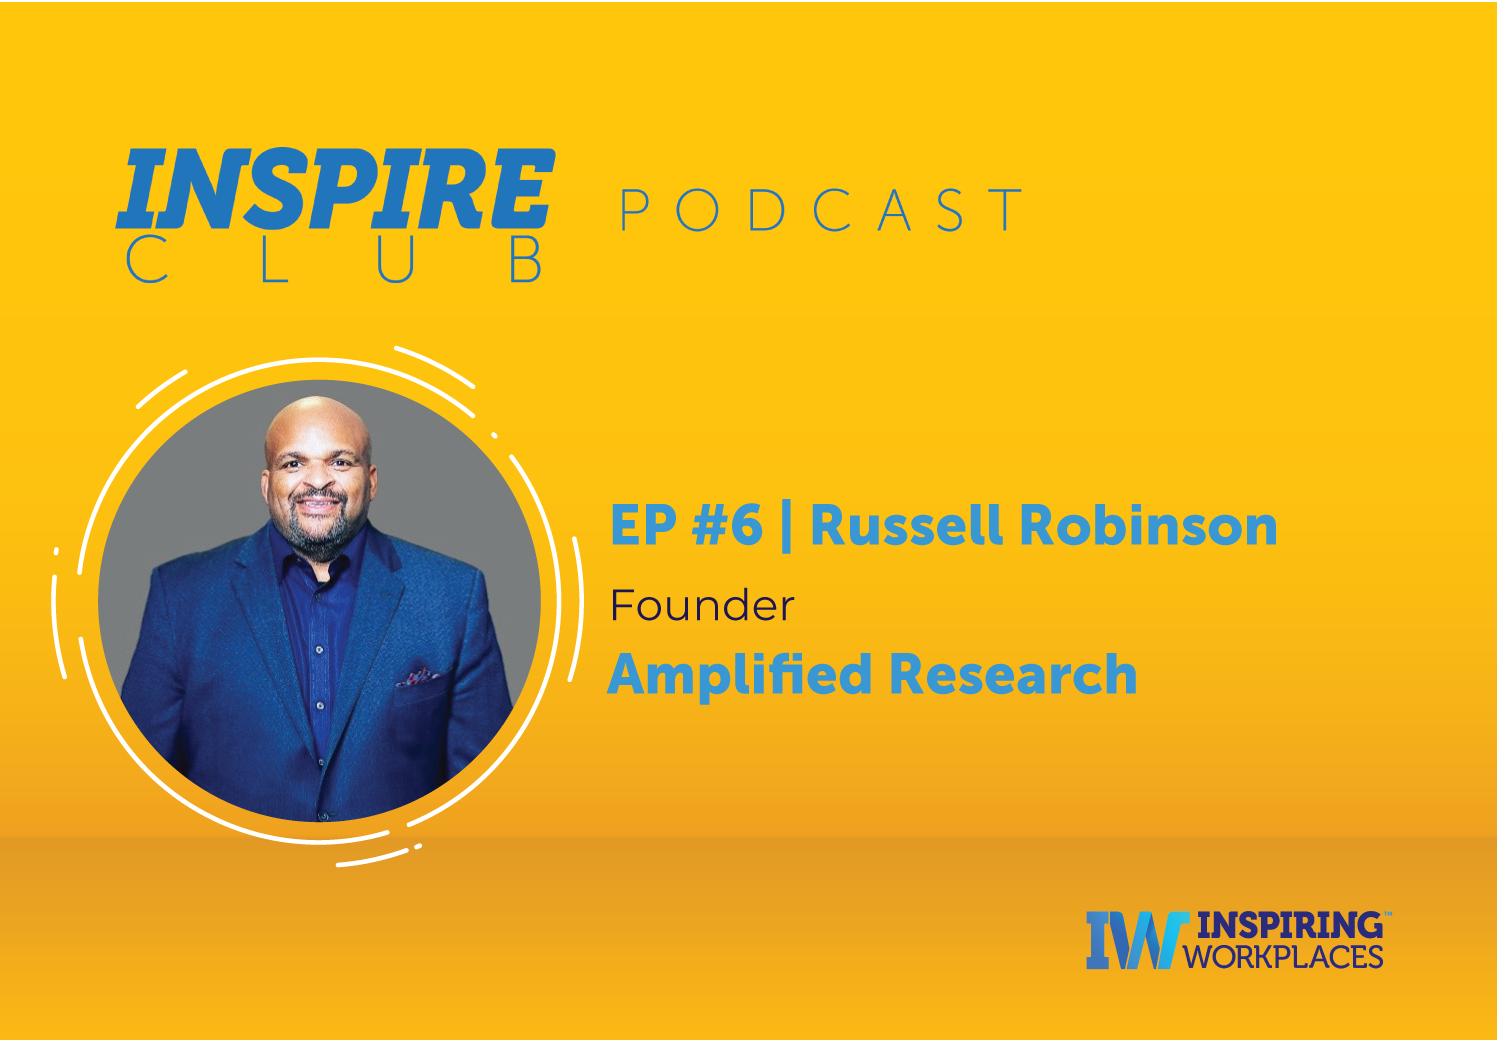 Inspire Club Podcast: EP #6 &#8211; Russell Robinson